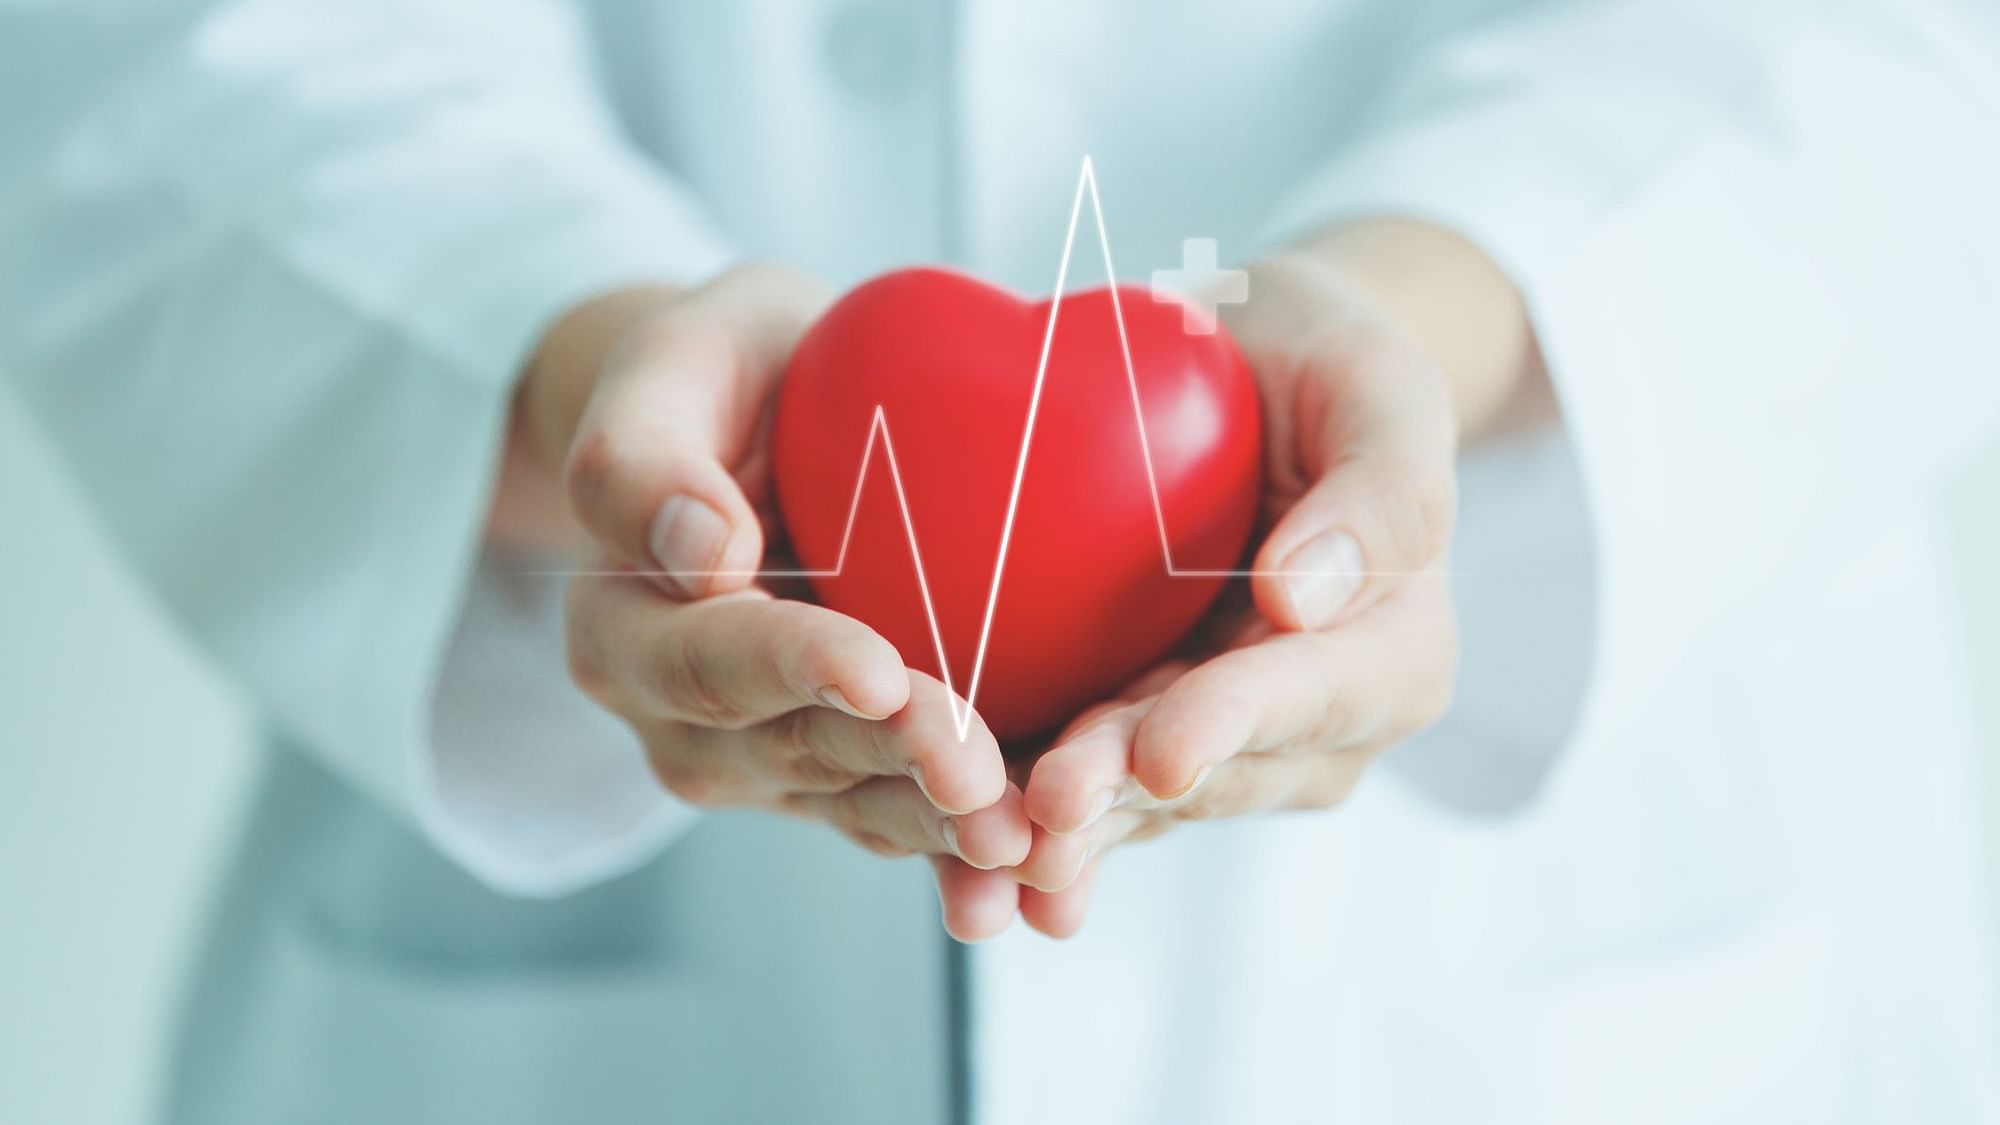 The researchers said the system could eventually help avert up to one in three heart failure readmissions.